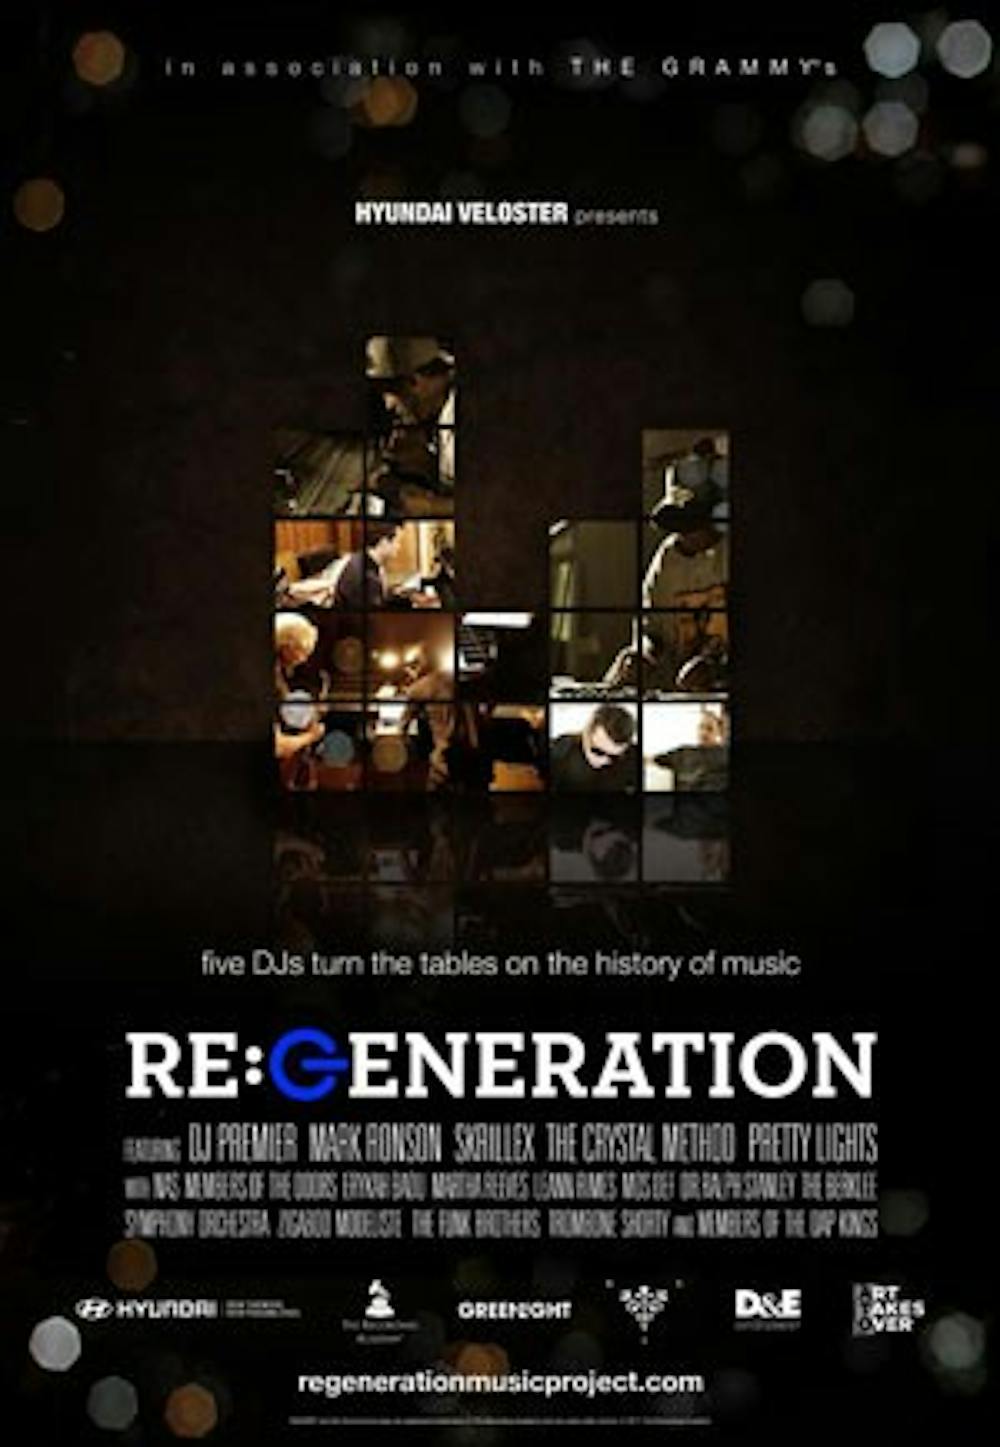 The Re:generation movie poster. Photo from amoeba.com.